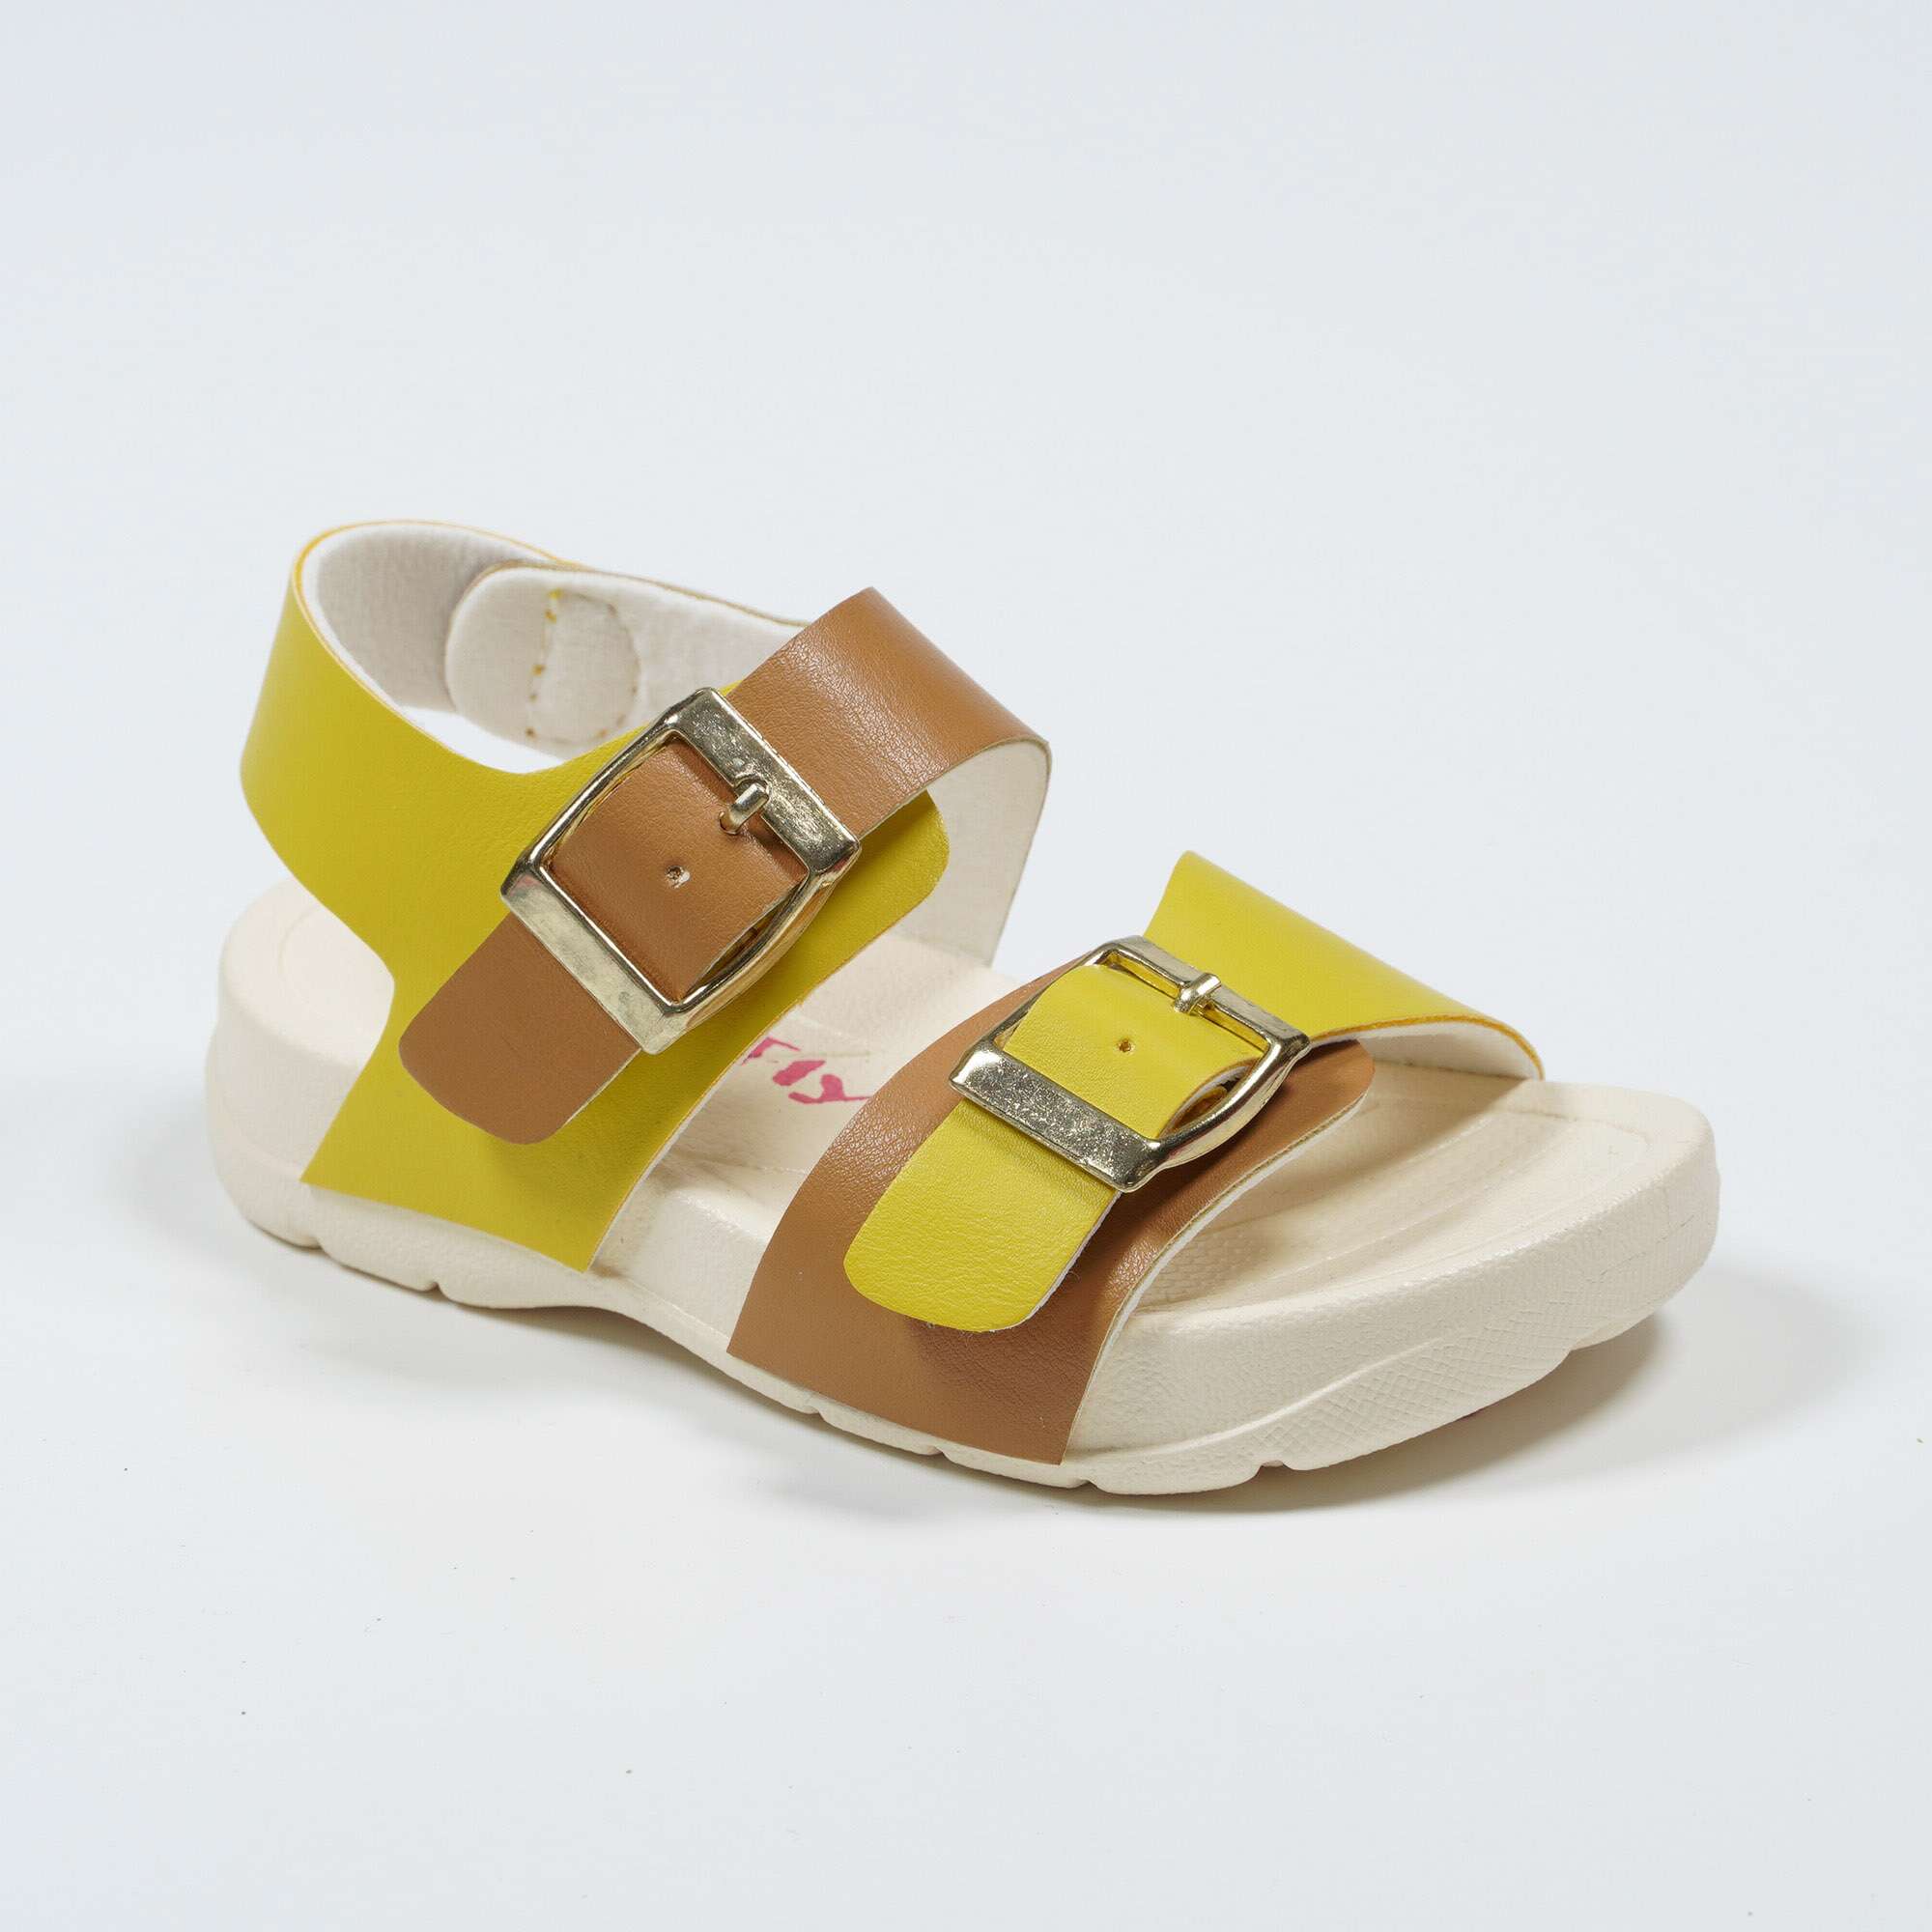 Boys-and-Girls-Flat-Non-Slip-PVC-Outsole-Sandals-YDX2311C-5-yellow